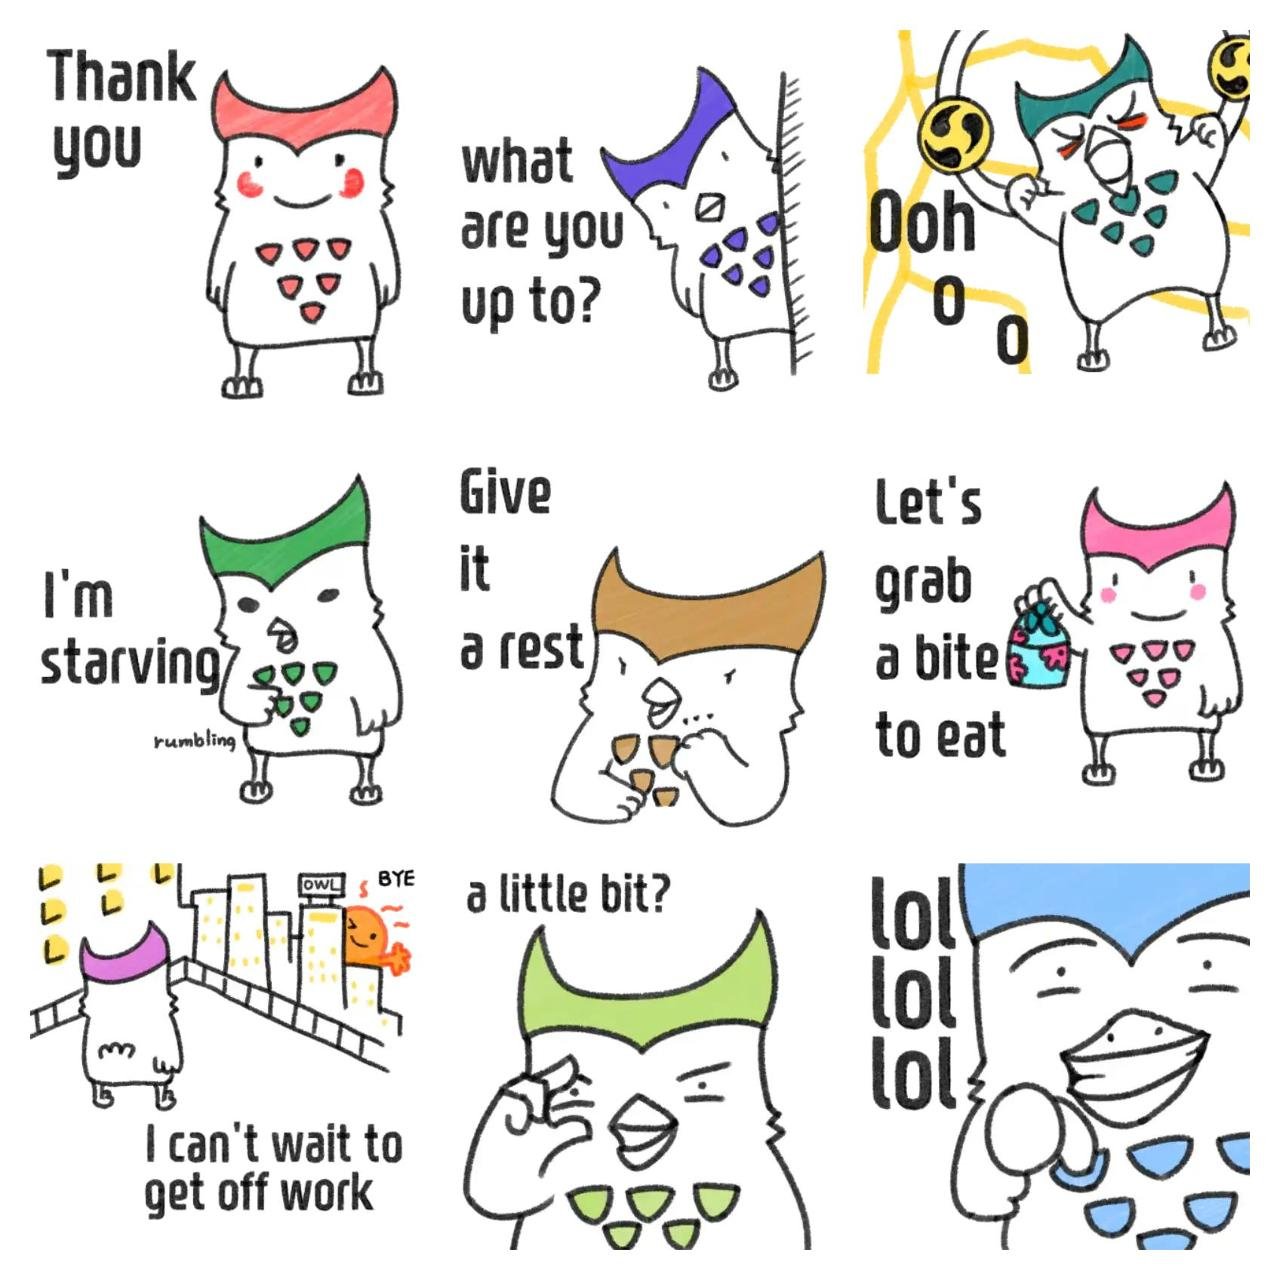 Awesome owl Fuku vol02-2 Animals sticker pack for Whatsapp, Telegram, Signal, and others chatting and message apps